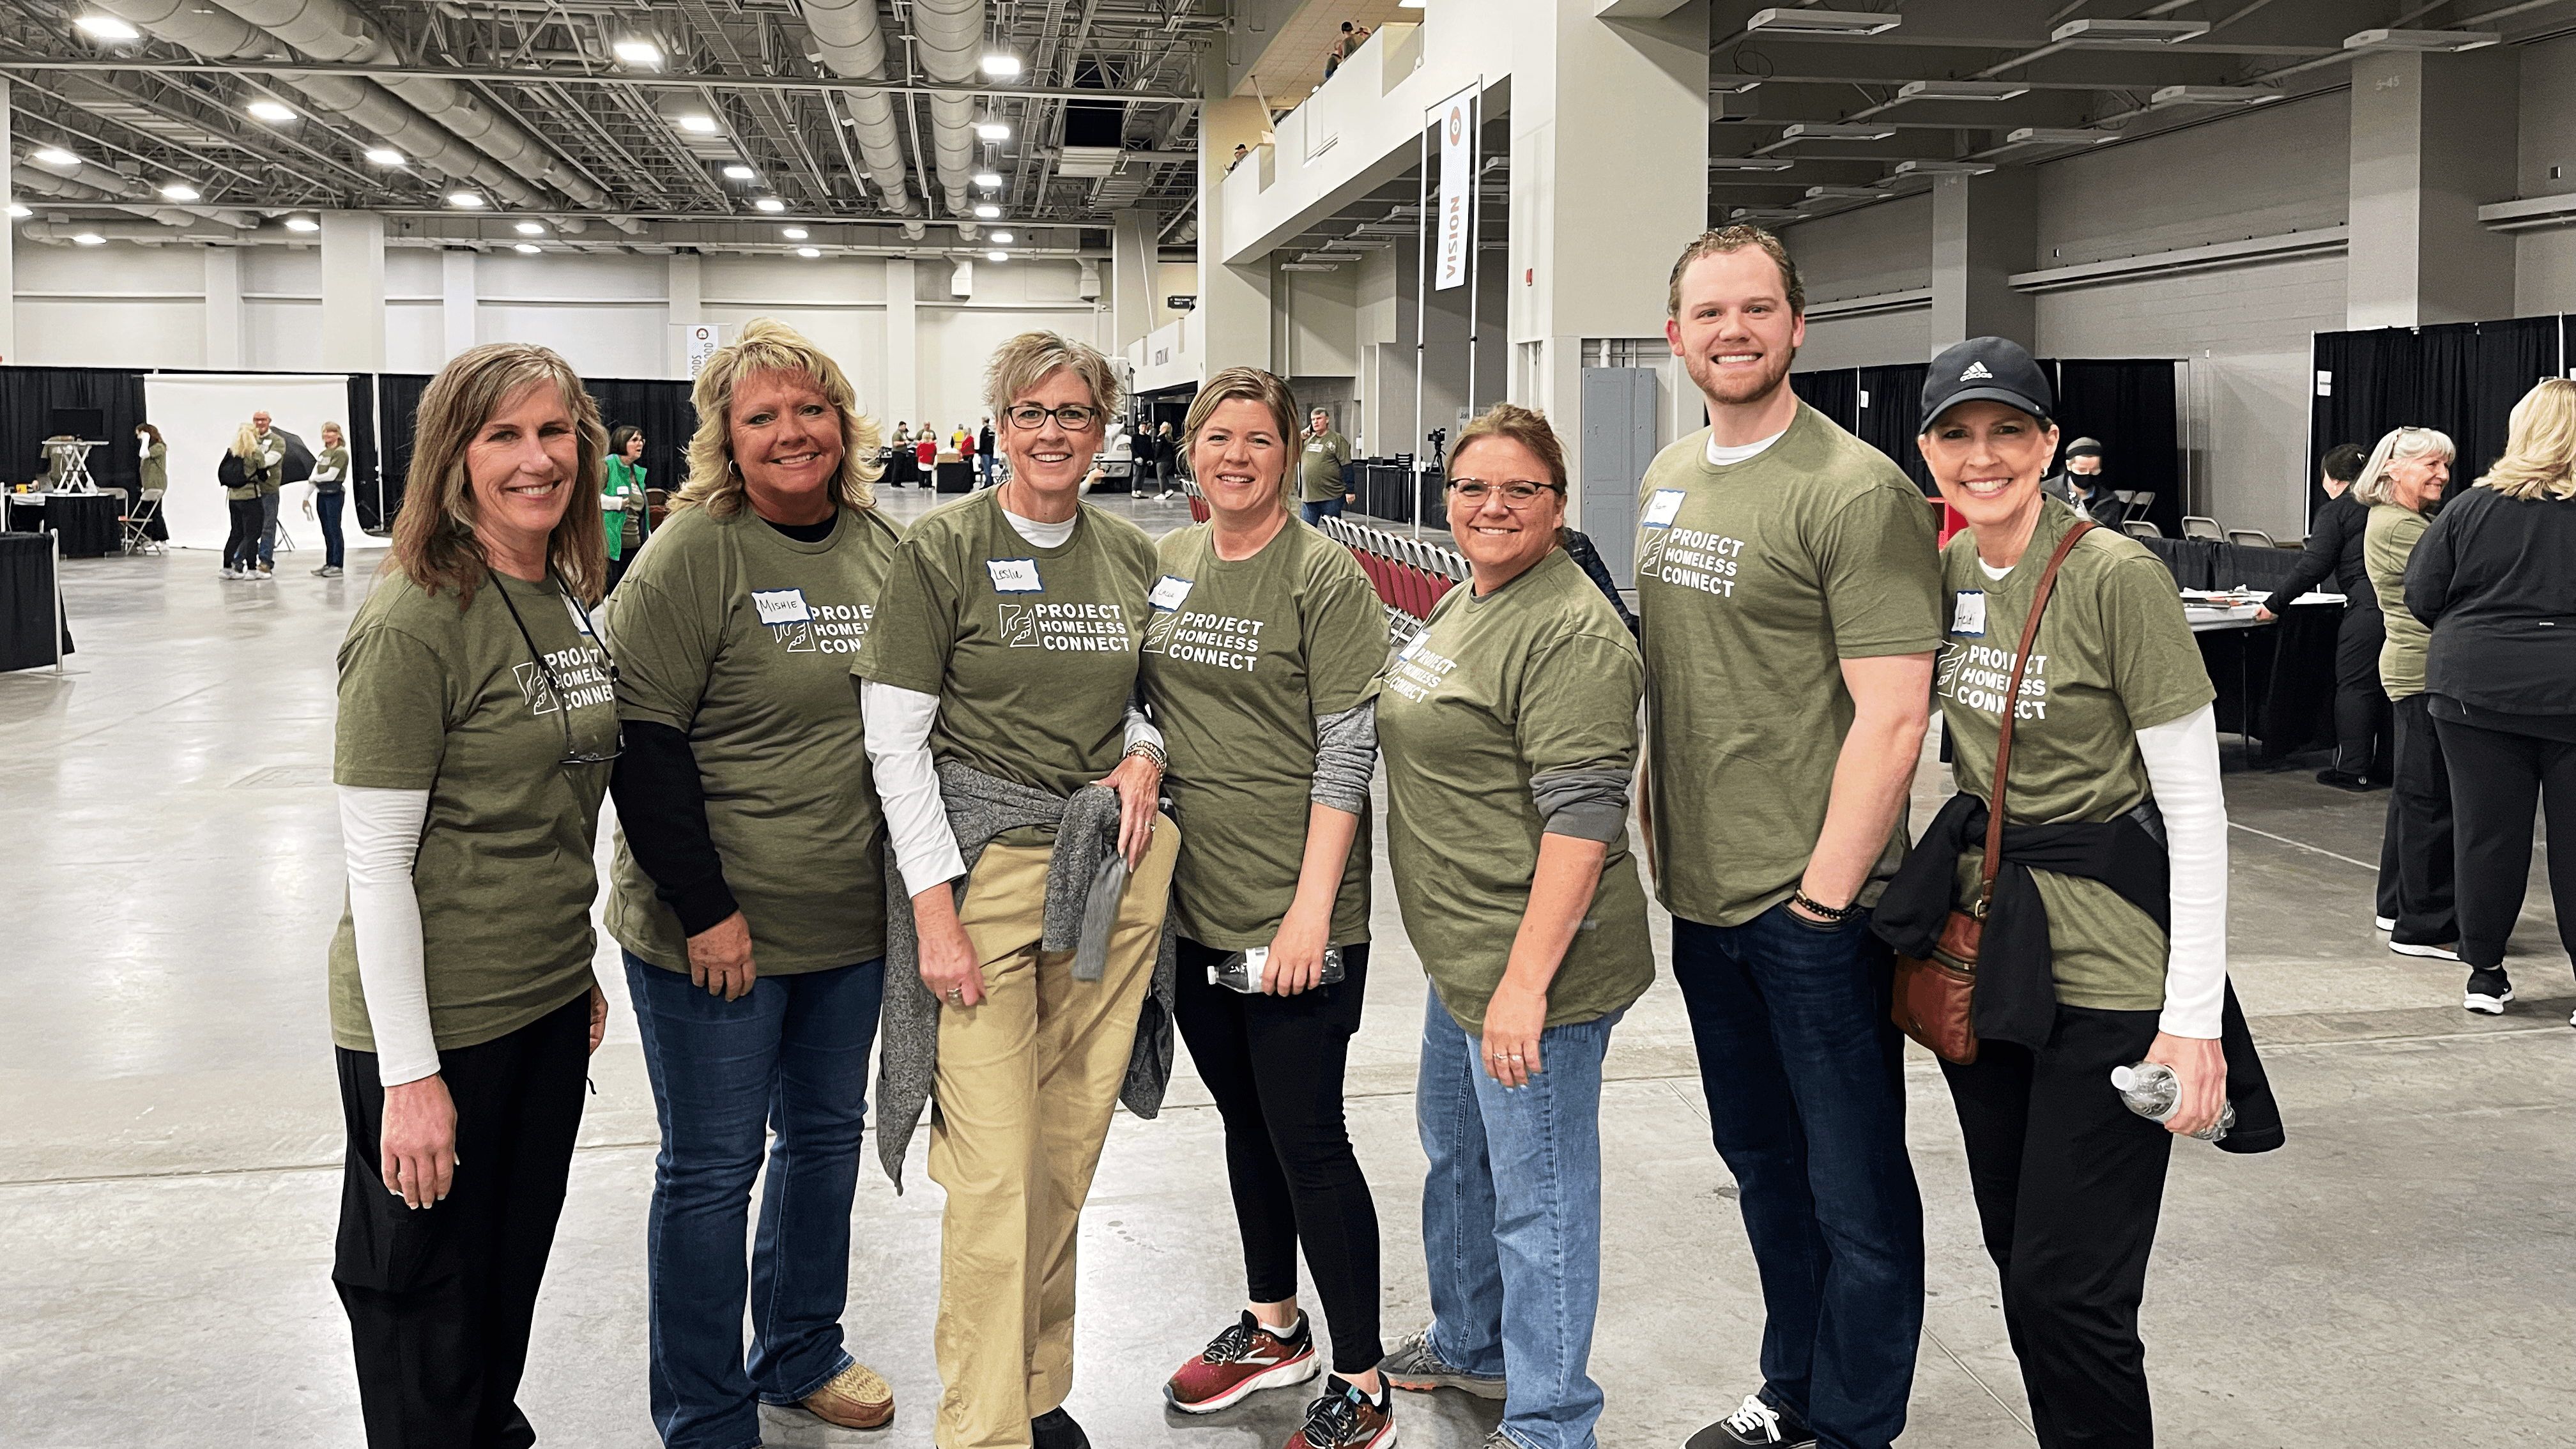 WaFd employees volunteering for Project Homeless Connect in Utah